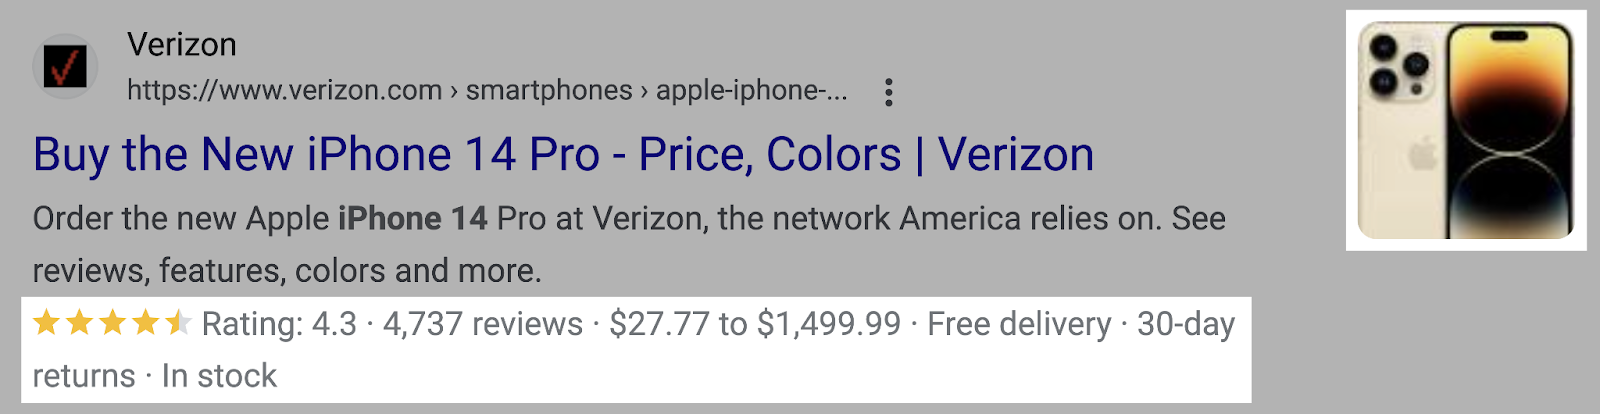 an example of a product markup snippet for buying an iPhone 14 on Verizon